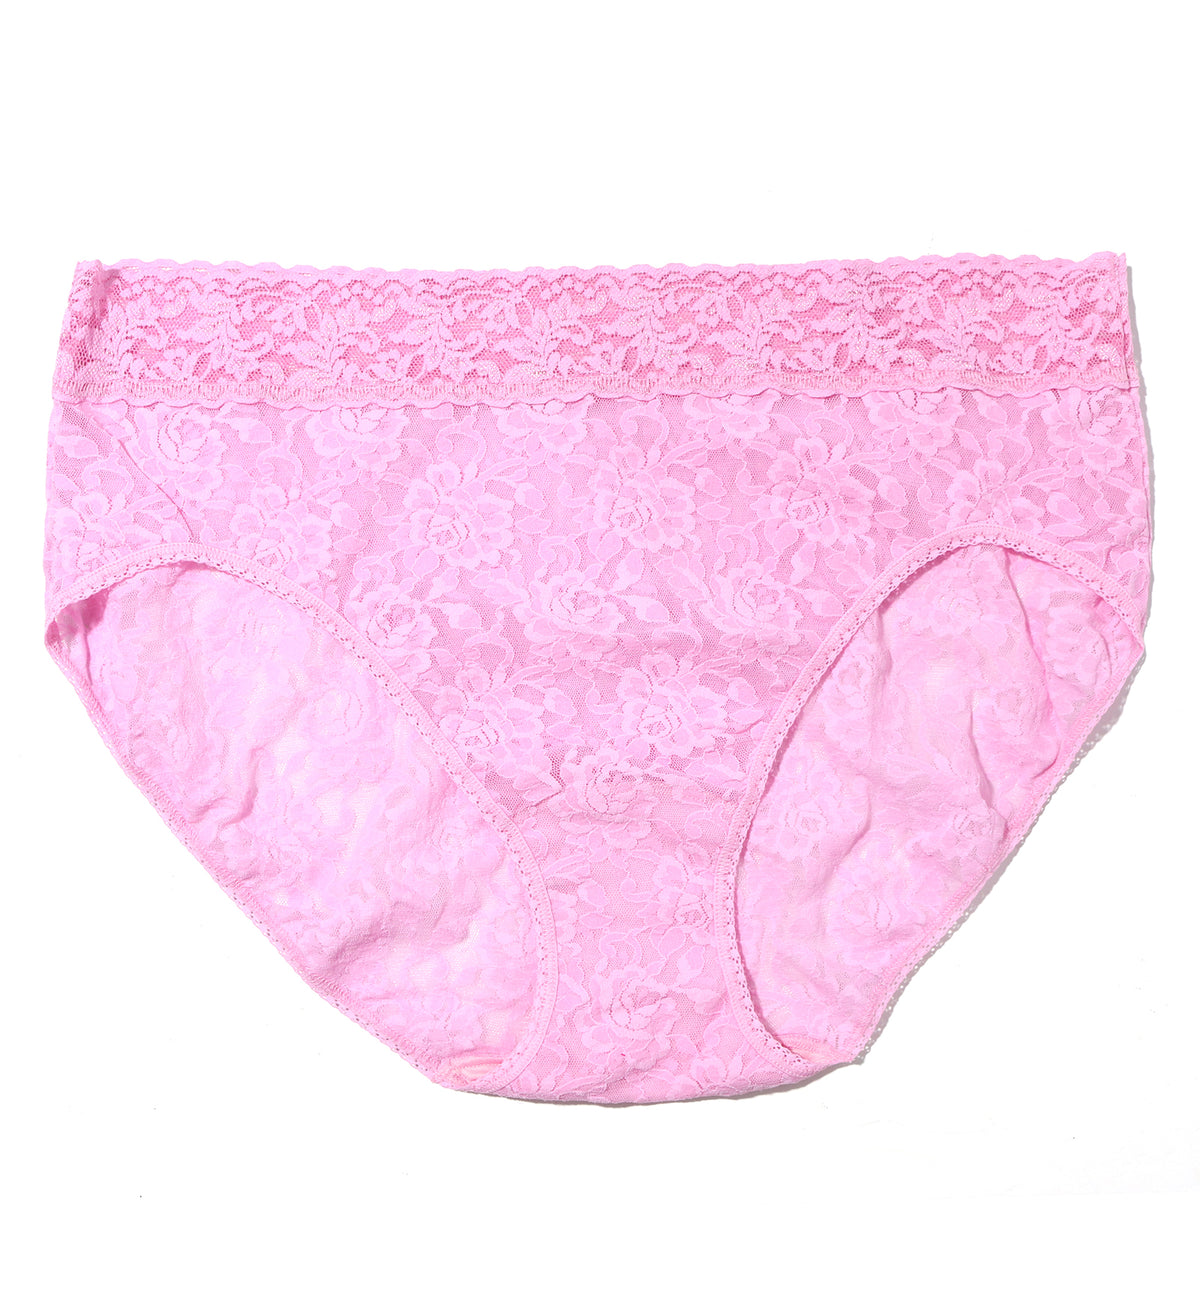 Hanky Panky Signature Lace French Brief PLUS (461X),1X,Cotton Candy - Cotton Candy,1X